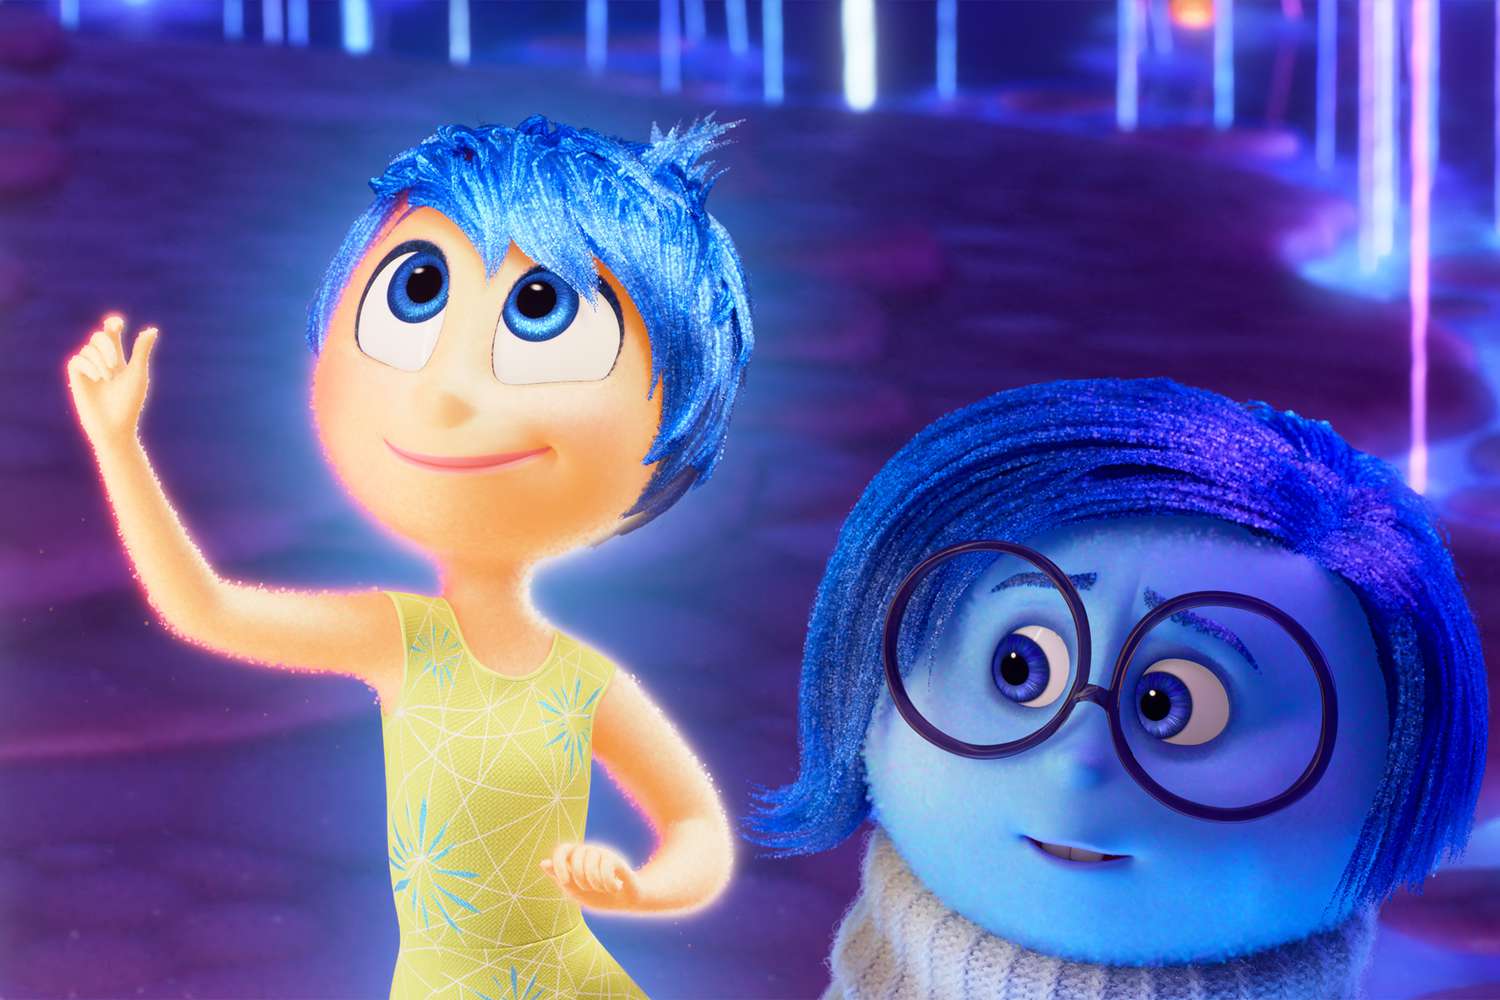 INSIDE OUT 2 - Featuring Amy Poehler as the voice of Joy, and Phyllis Smith as the voice of Sadness